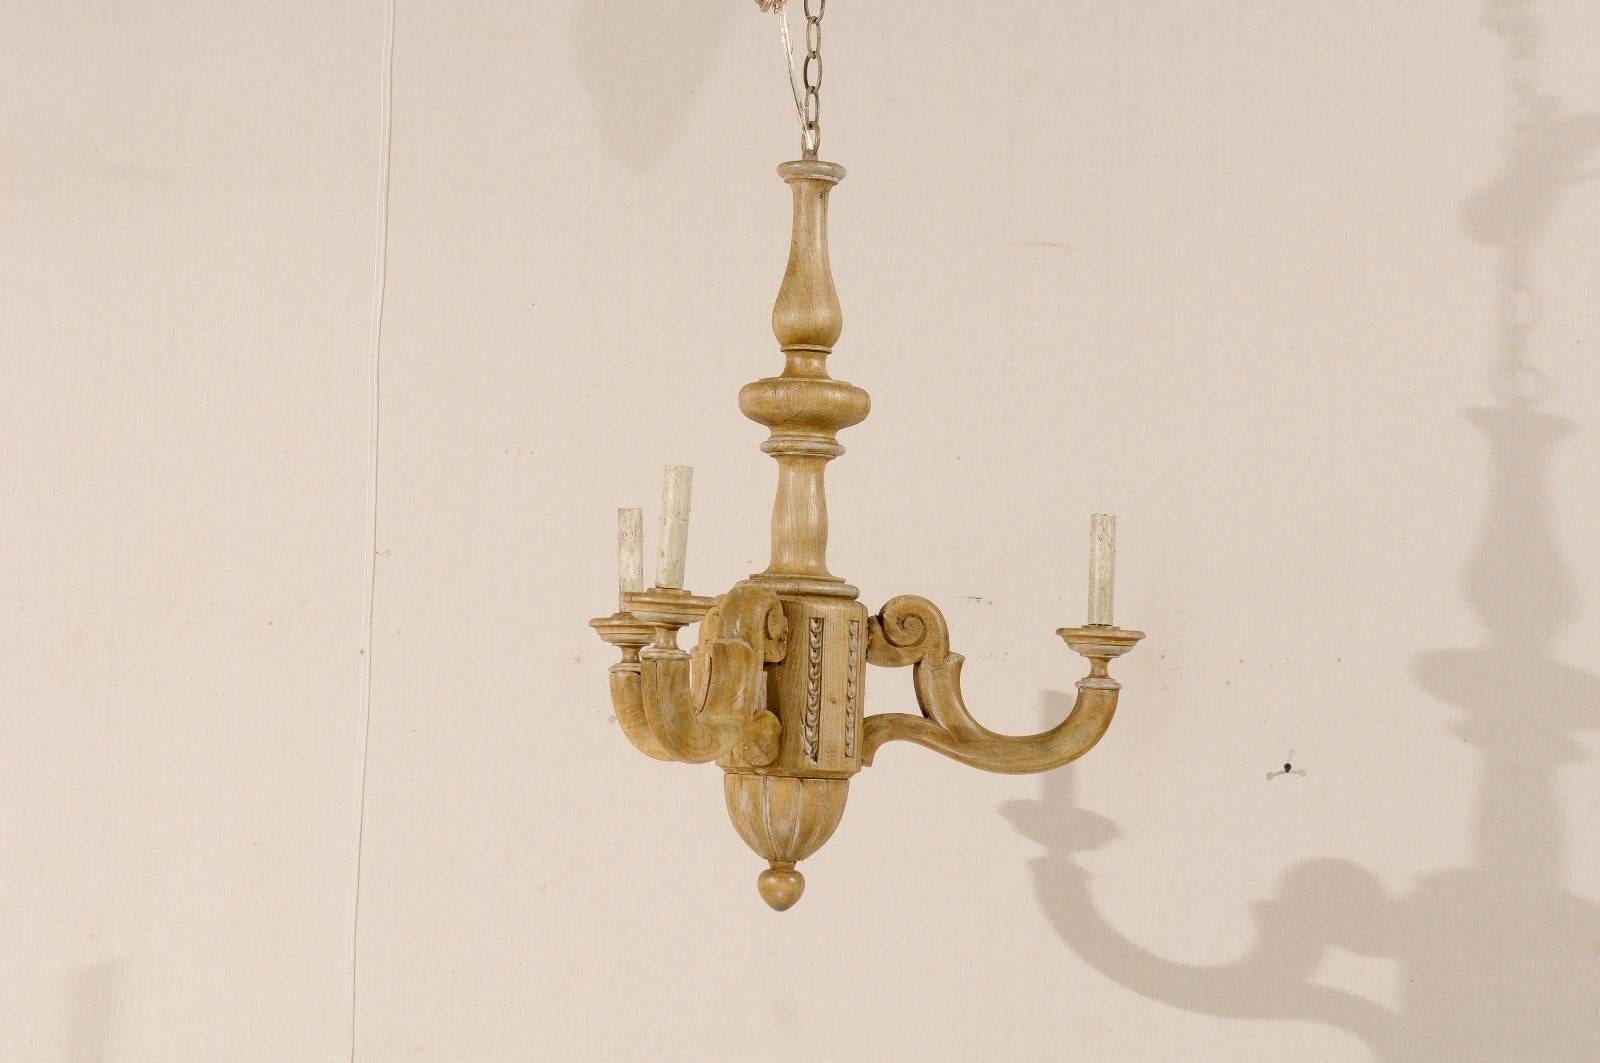 20th Century French Small Three-Light Natural Wood Chandelier in Warm Tan Wood Color